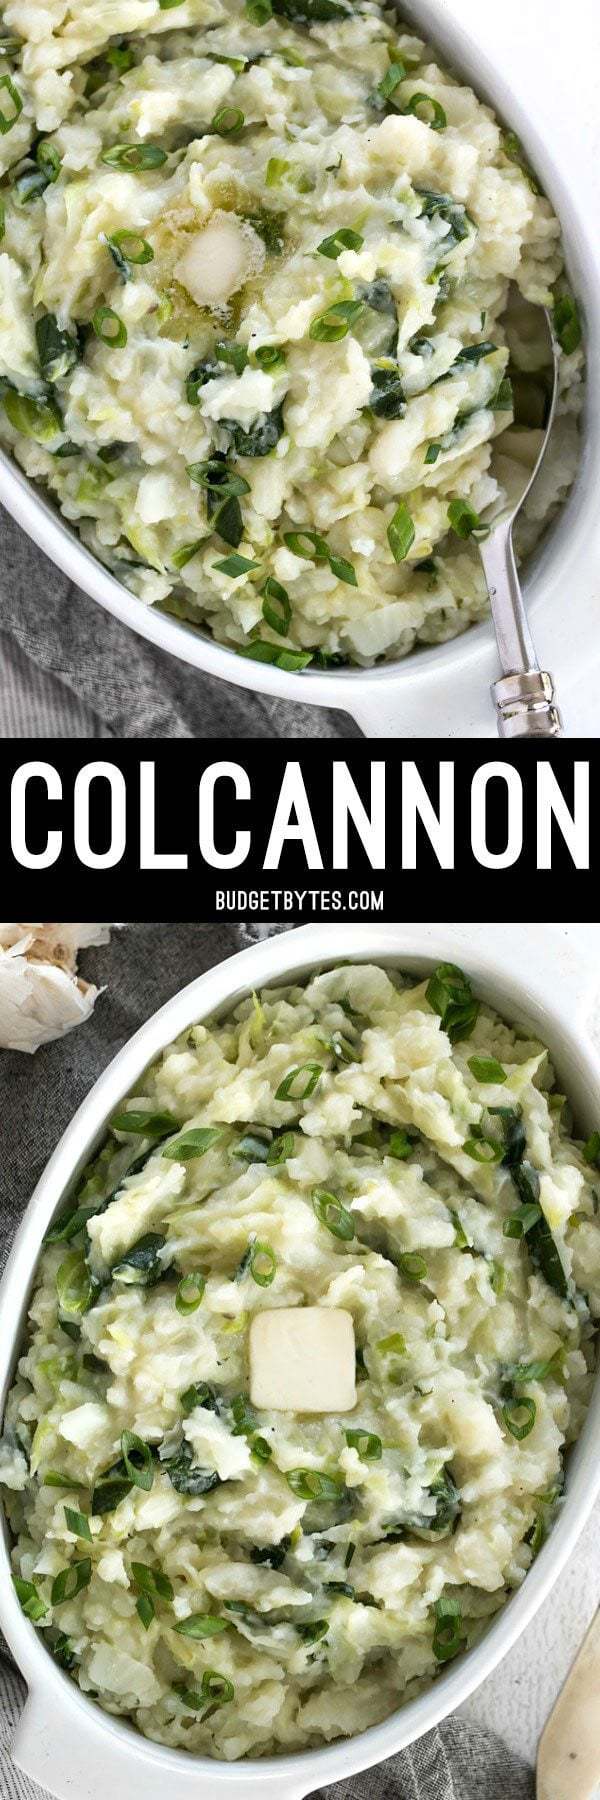 Colcannon is a simple Irish recipe that combines two hearty but inexpensive ingredients to make a delicious and filling side dish. BudgetBytes.com